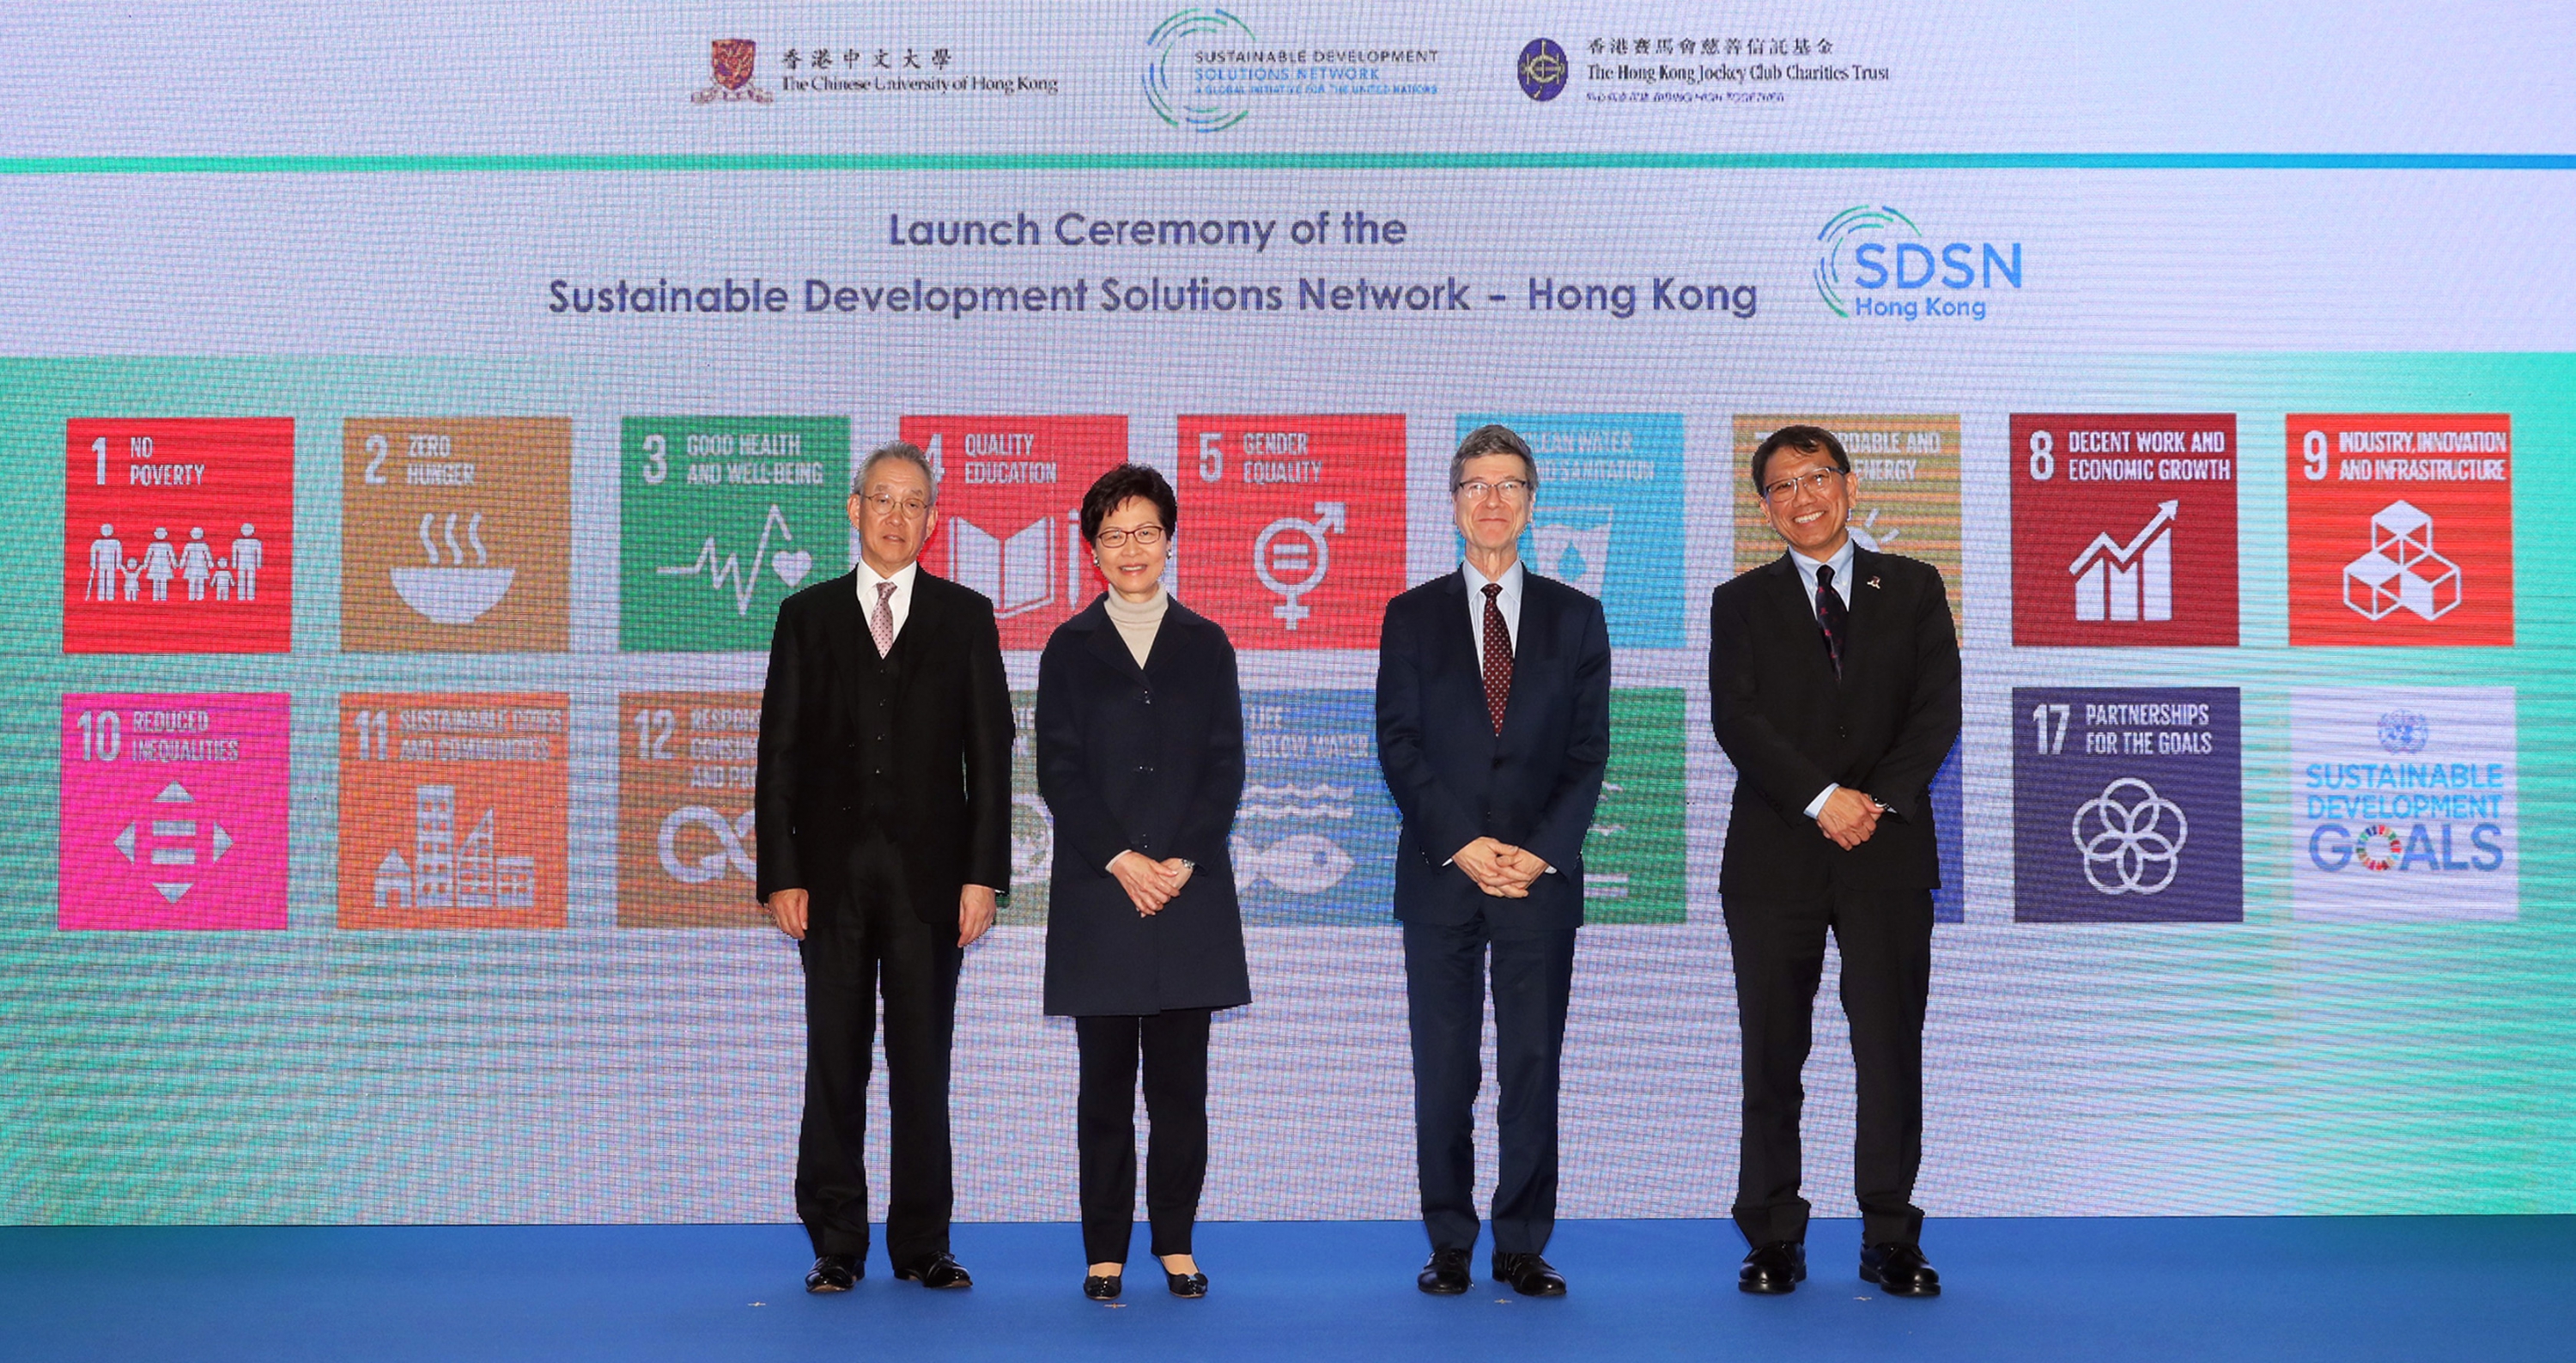 Hong Kong’s Chief Executive Carrie Lam (2nd left) officiates at the launch ceremony for SDSN Hong Kong